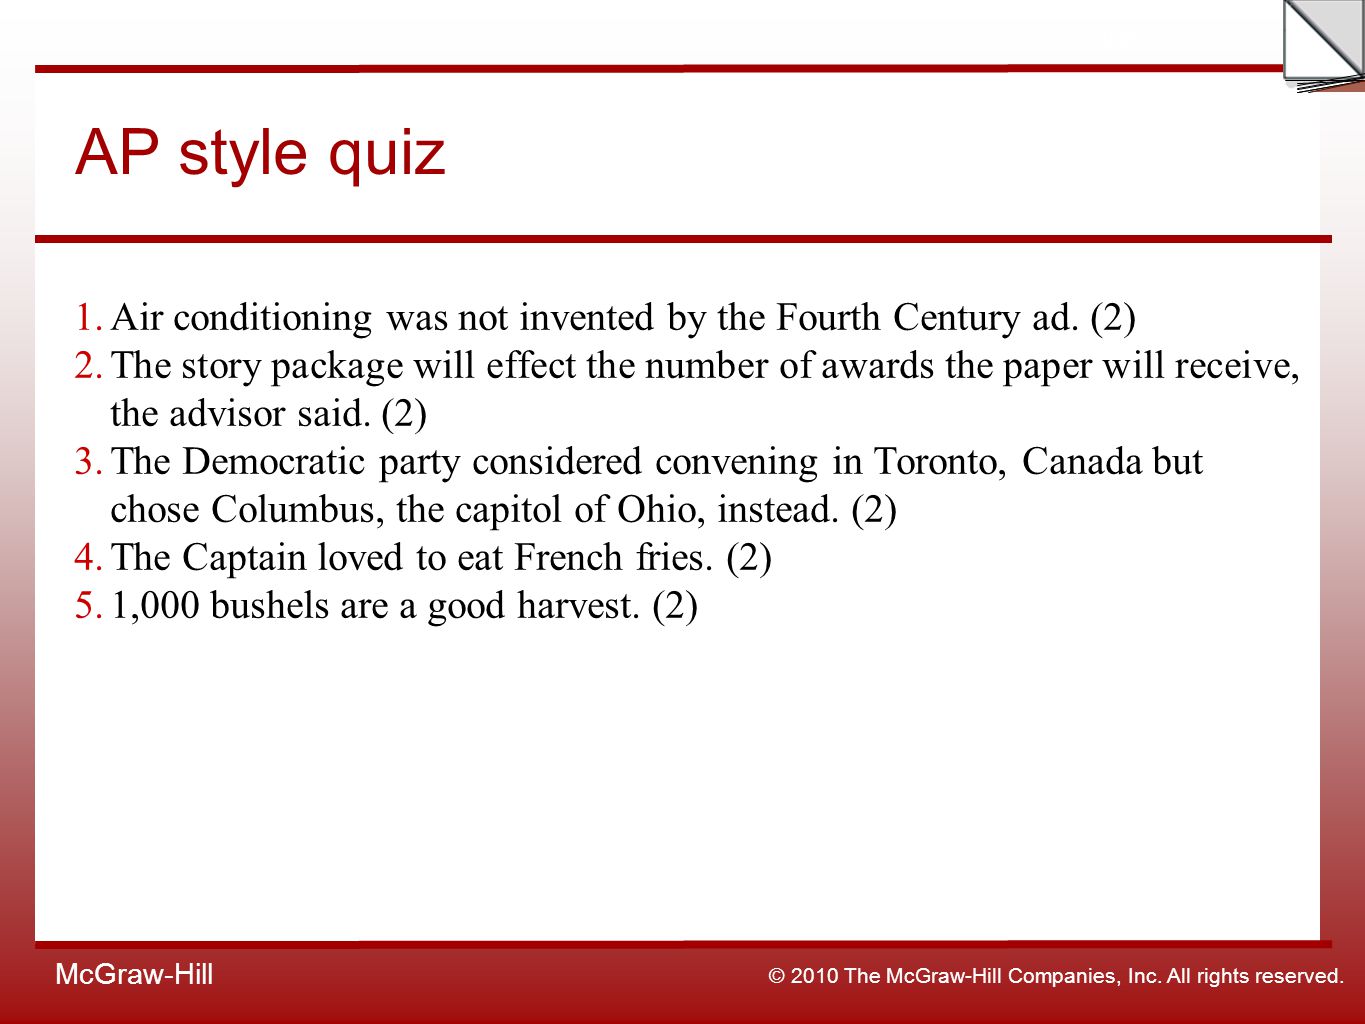 What is an AP style quiz?